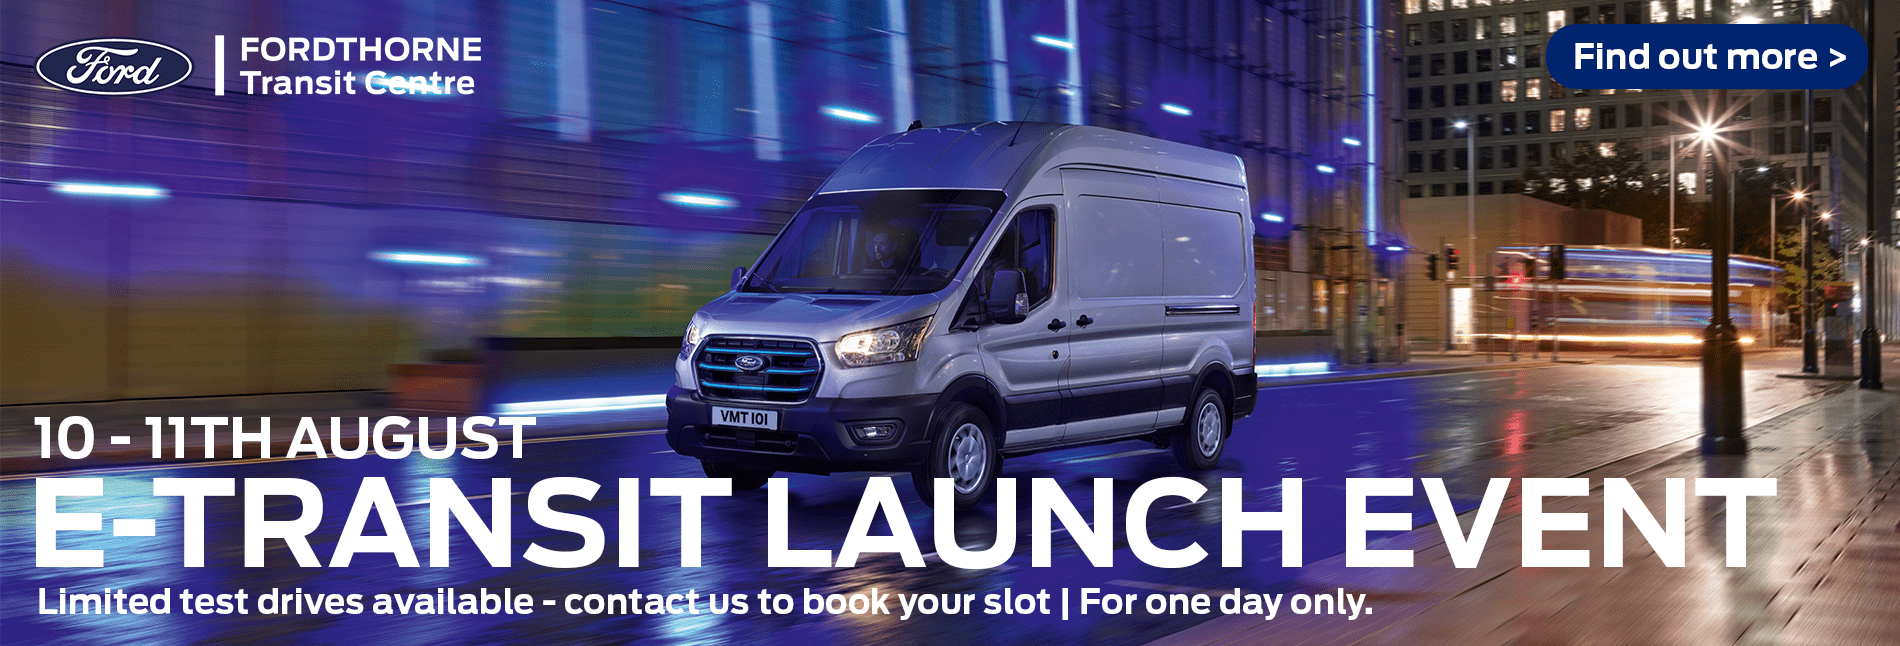 Ford Etransit Launch Event